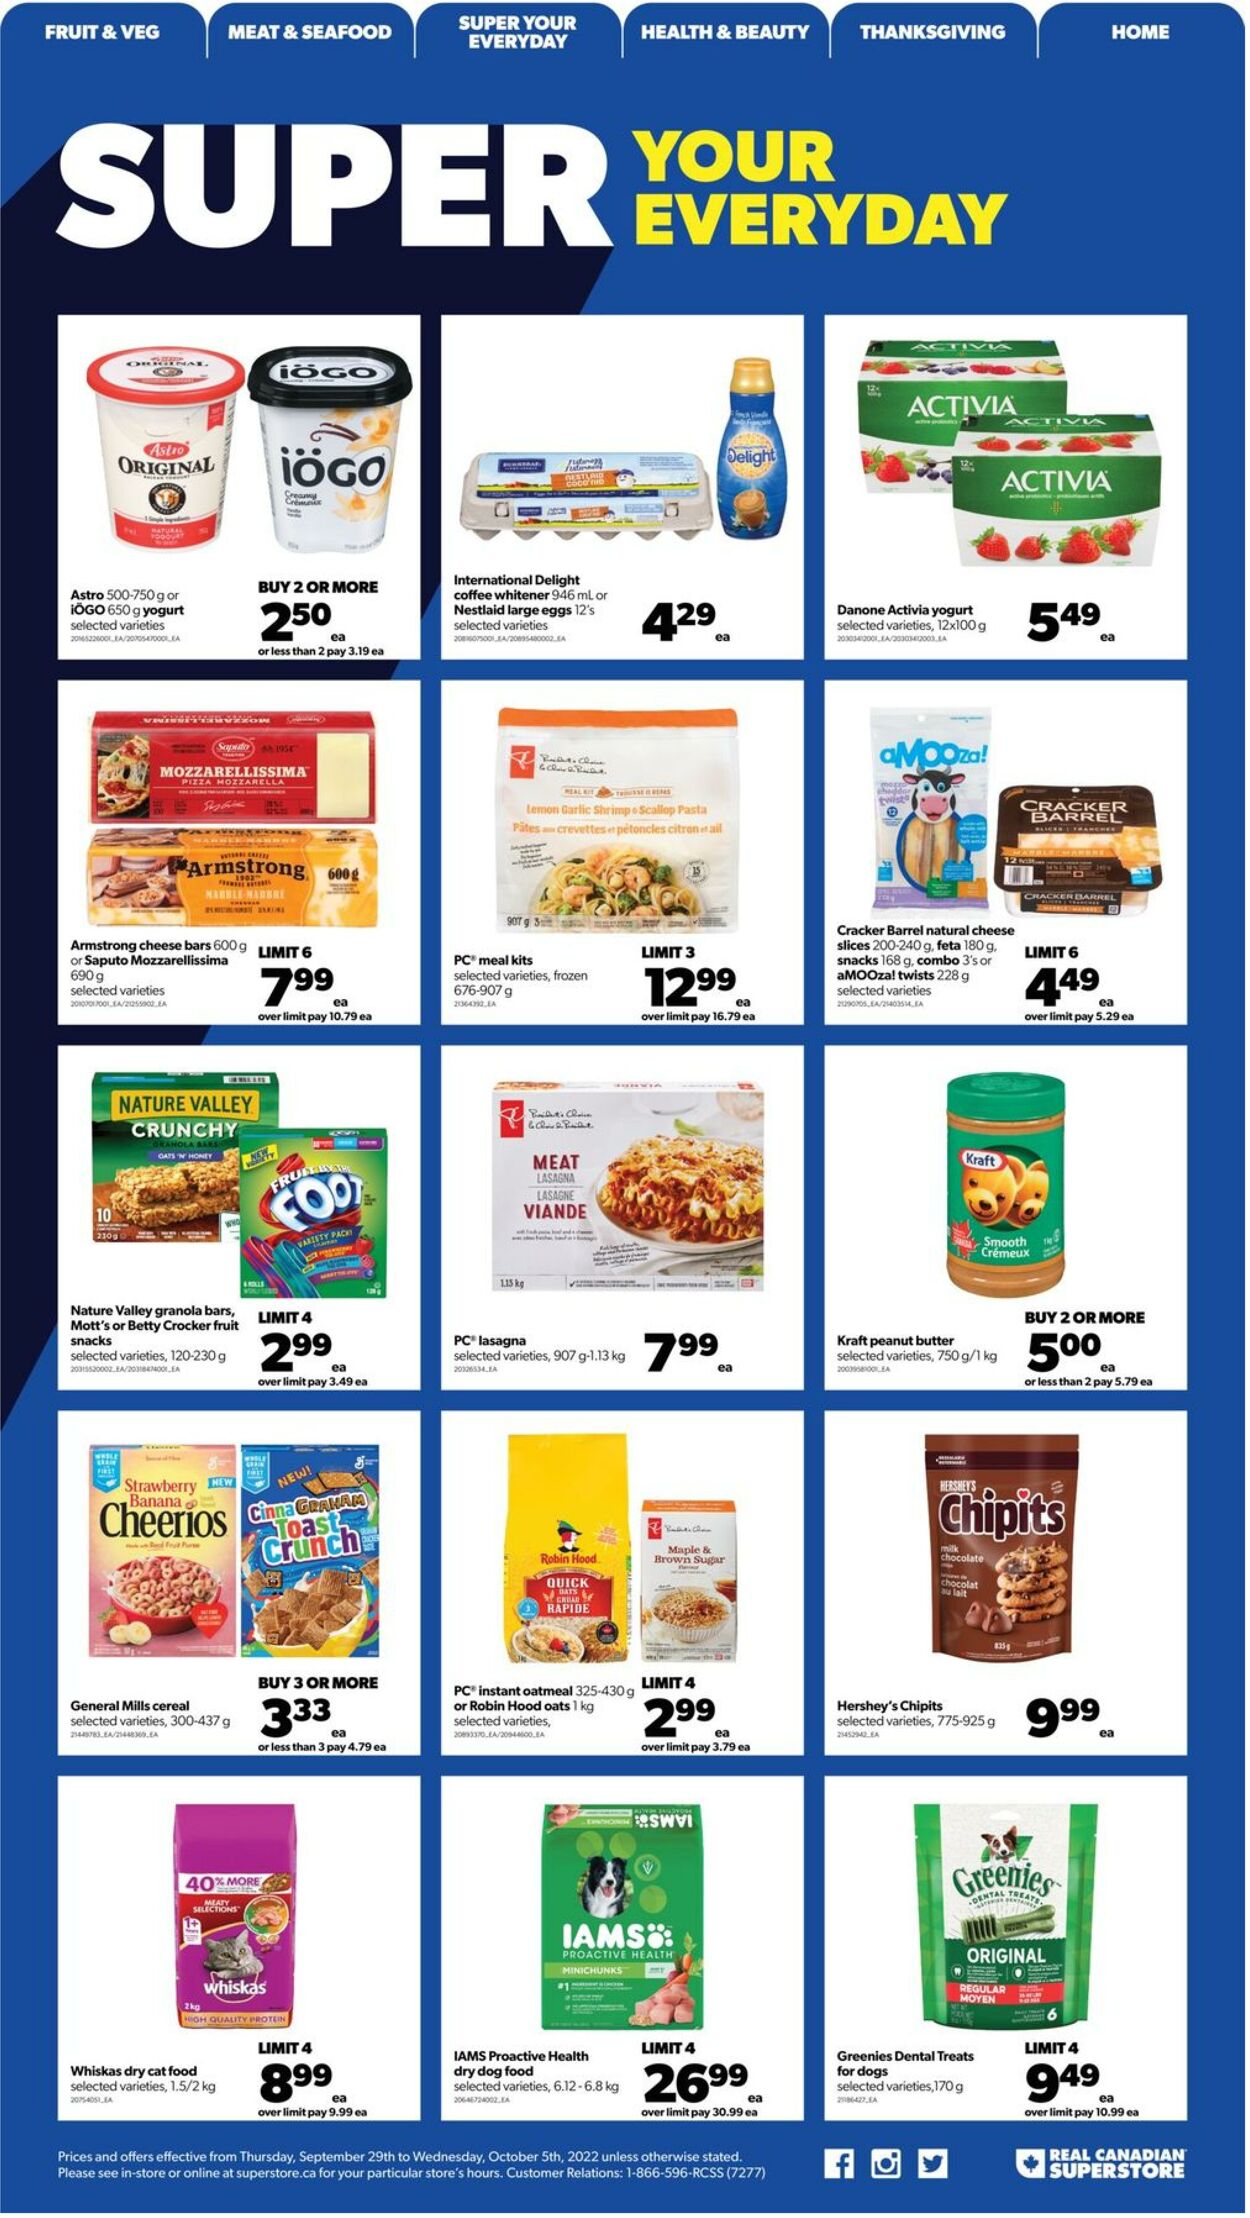 Flyer Real Canadian Superstore 29.09.2022 - 05.10.2022